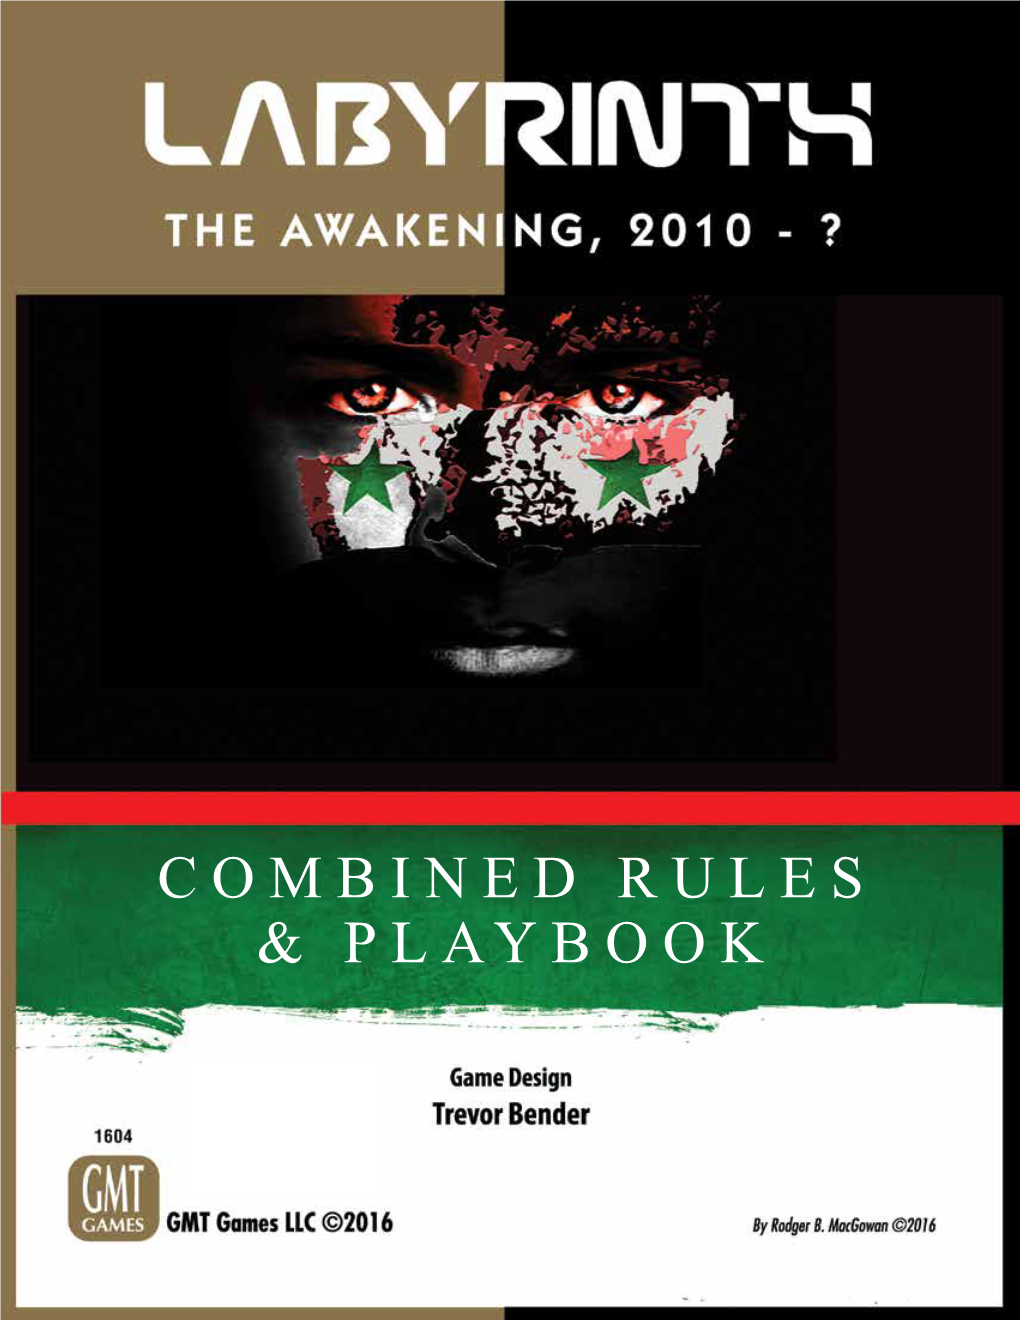 Combined Rules & Playbook